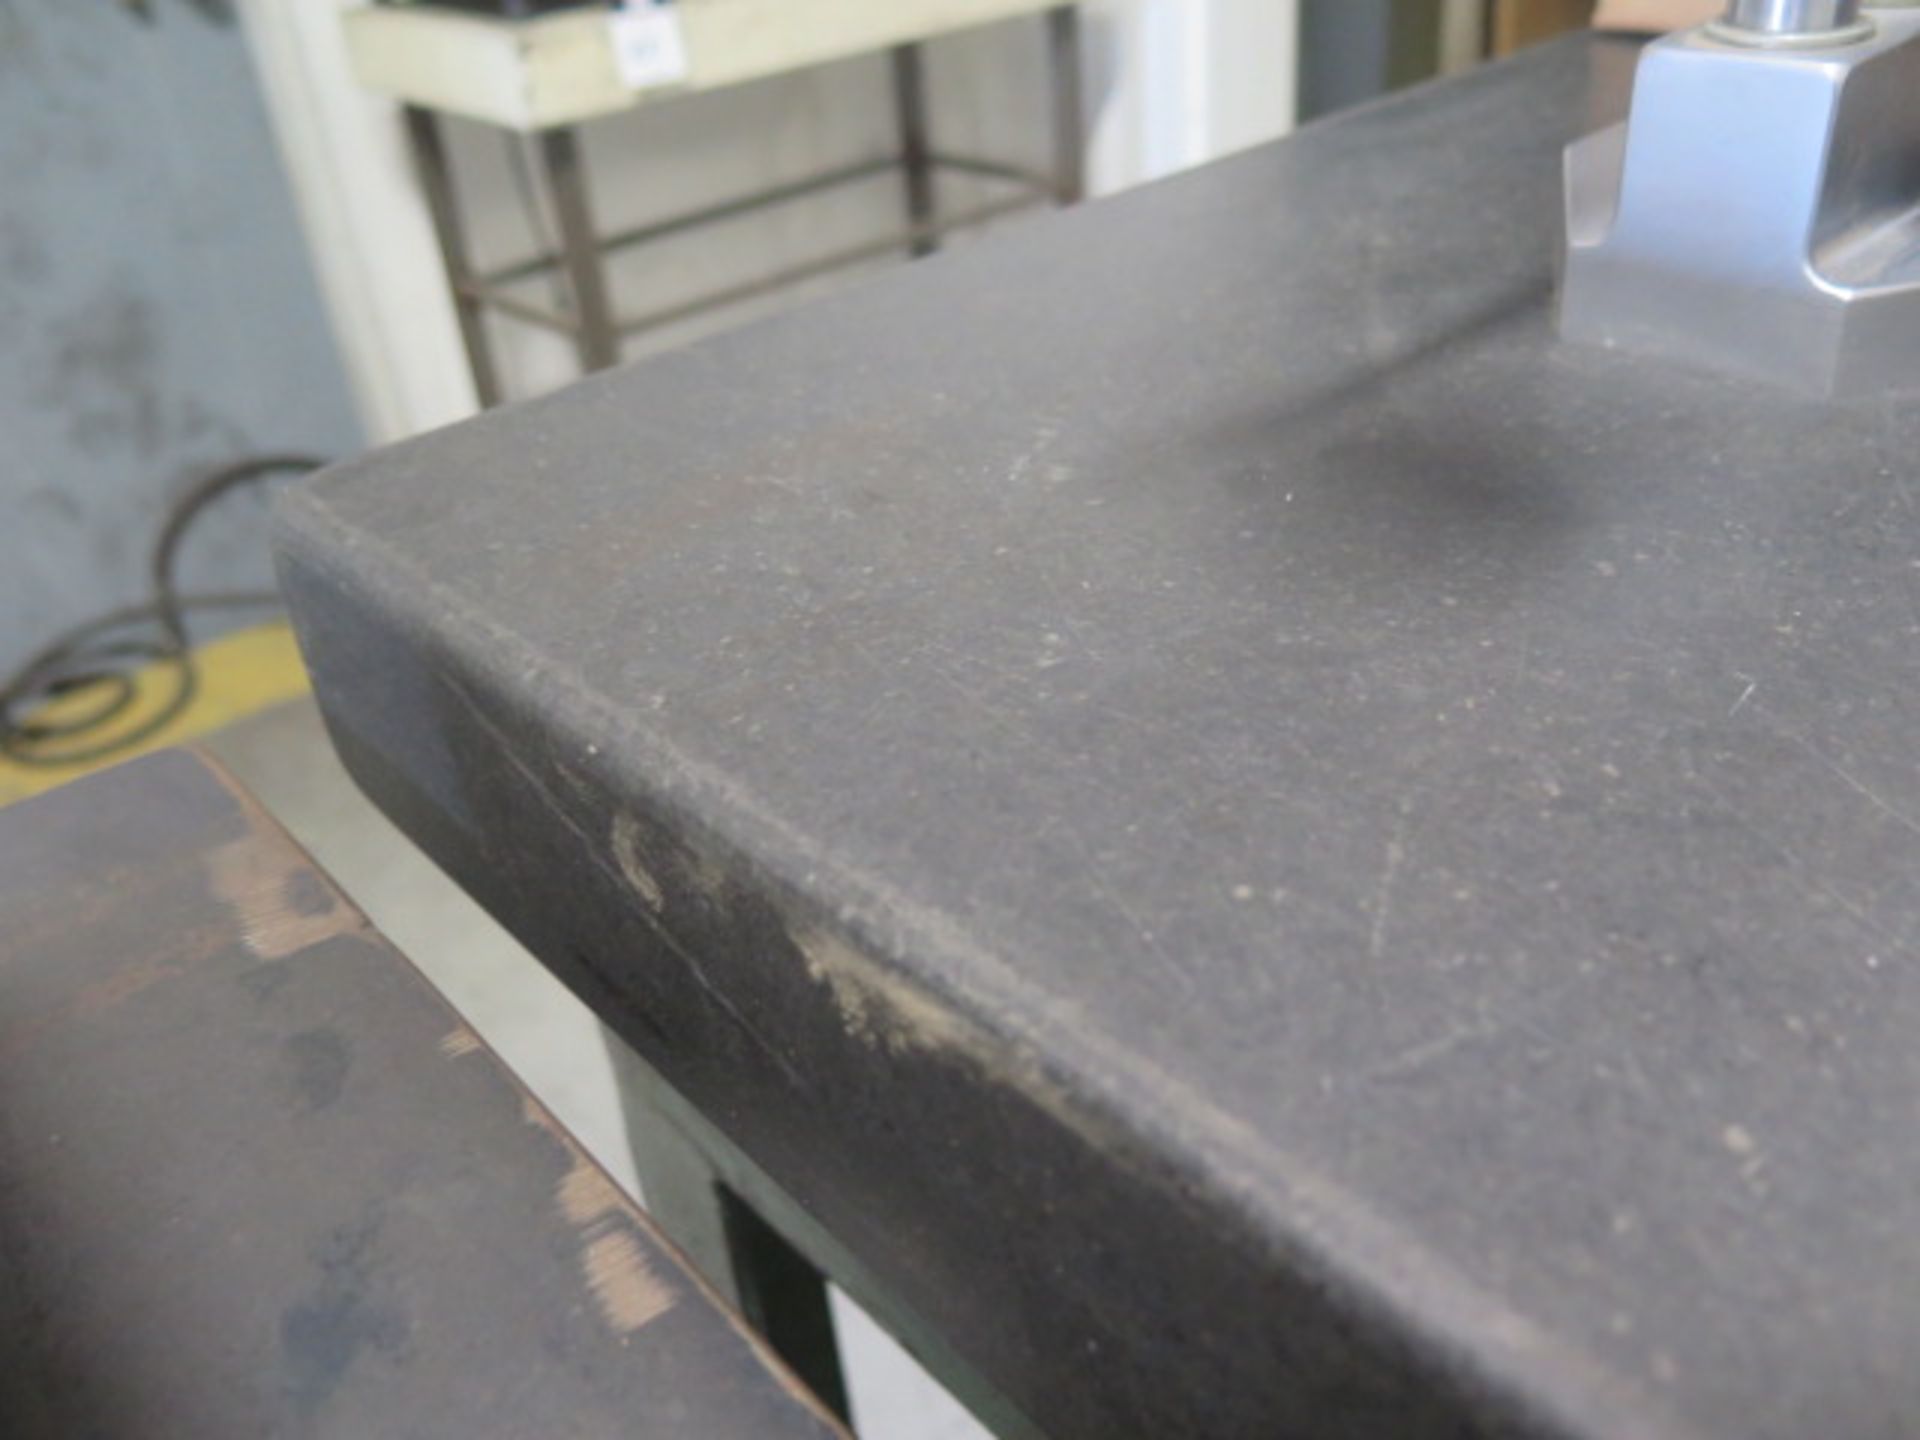 24" x 36" x 5" 2-Ledge Granite Surface Plate w/ Stand (SOLD AS-IS - NO WARRANTY) - Image 4 of 4